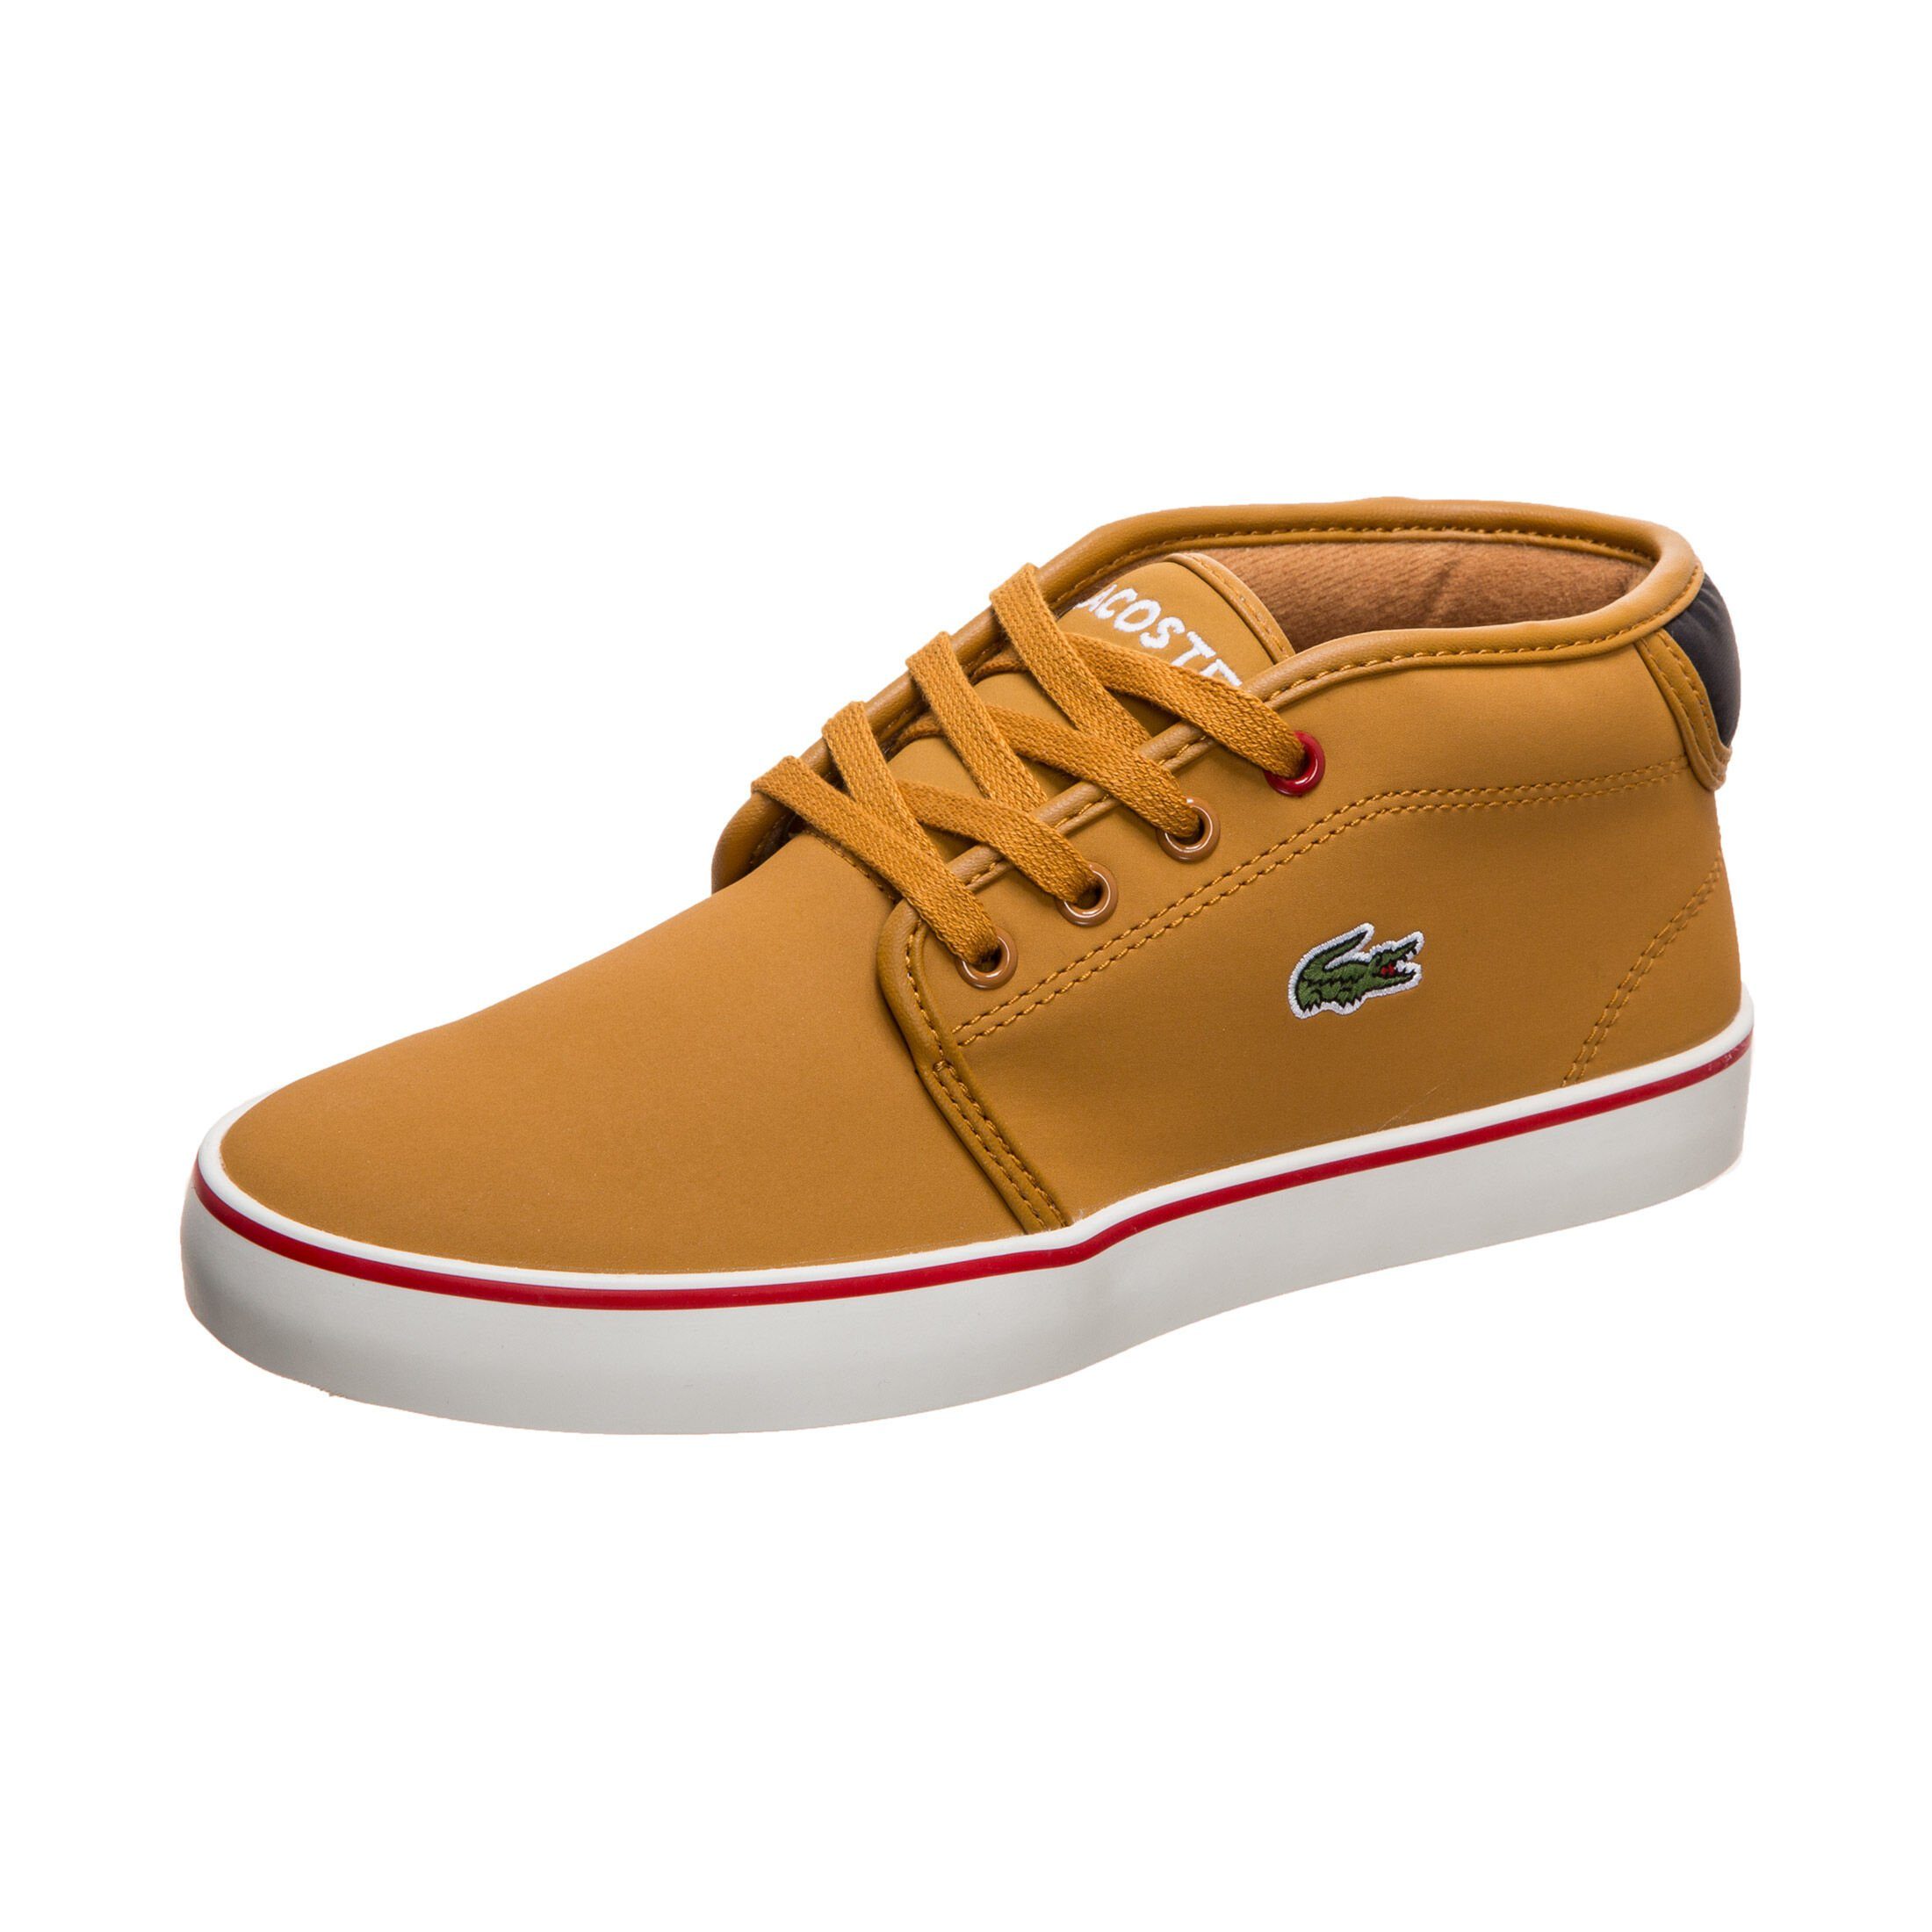 Lacoste Ampthill Thermo 419 1 Sneaker Kinder Sneaker